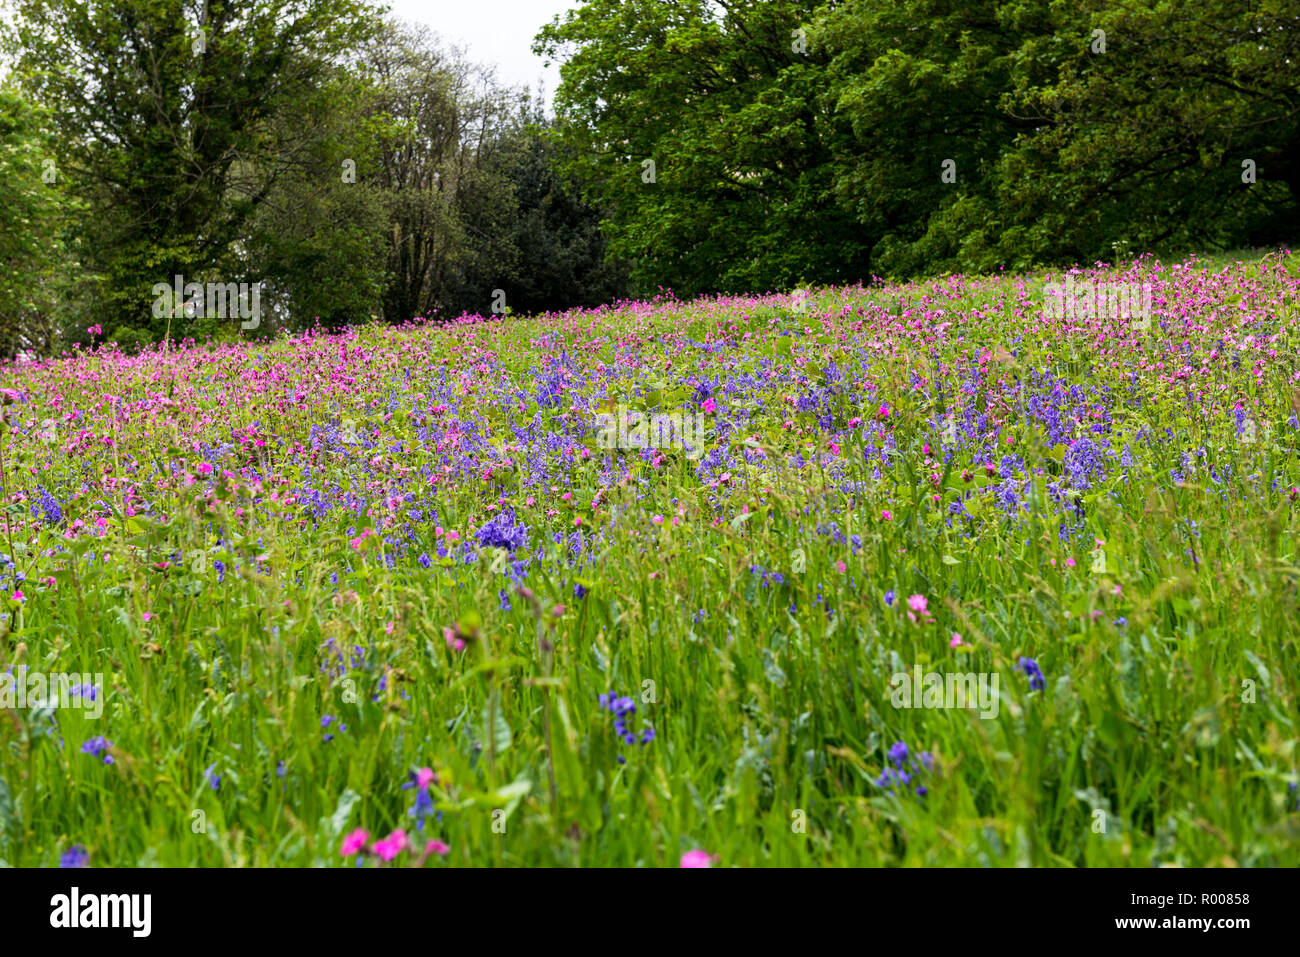 Wild flowers in a meadow. Stock Photo